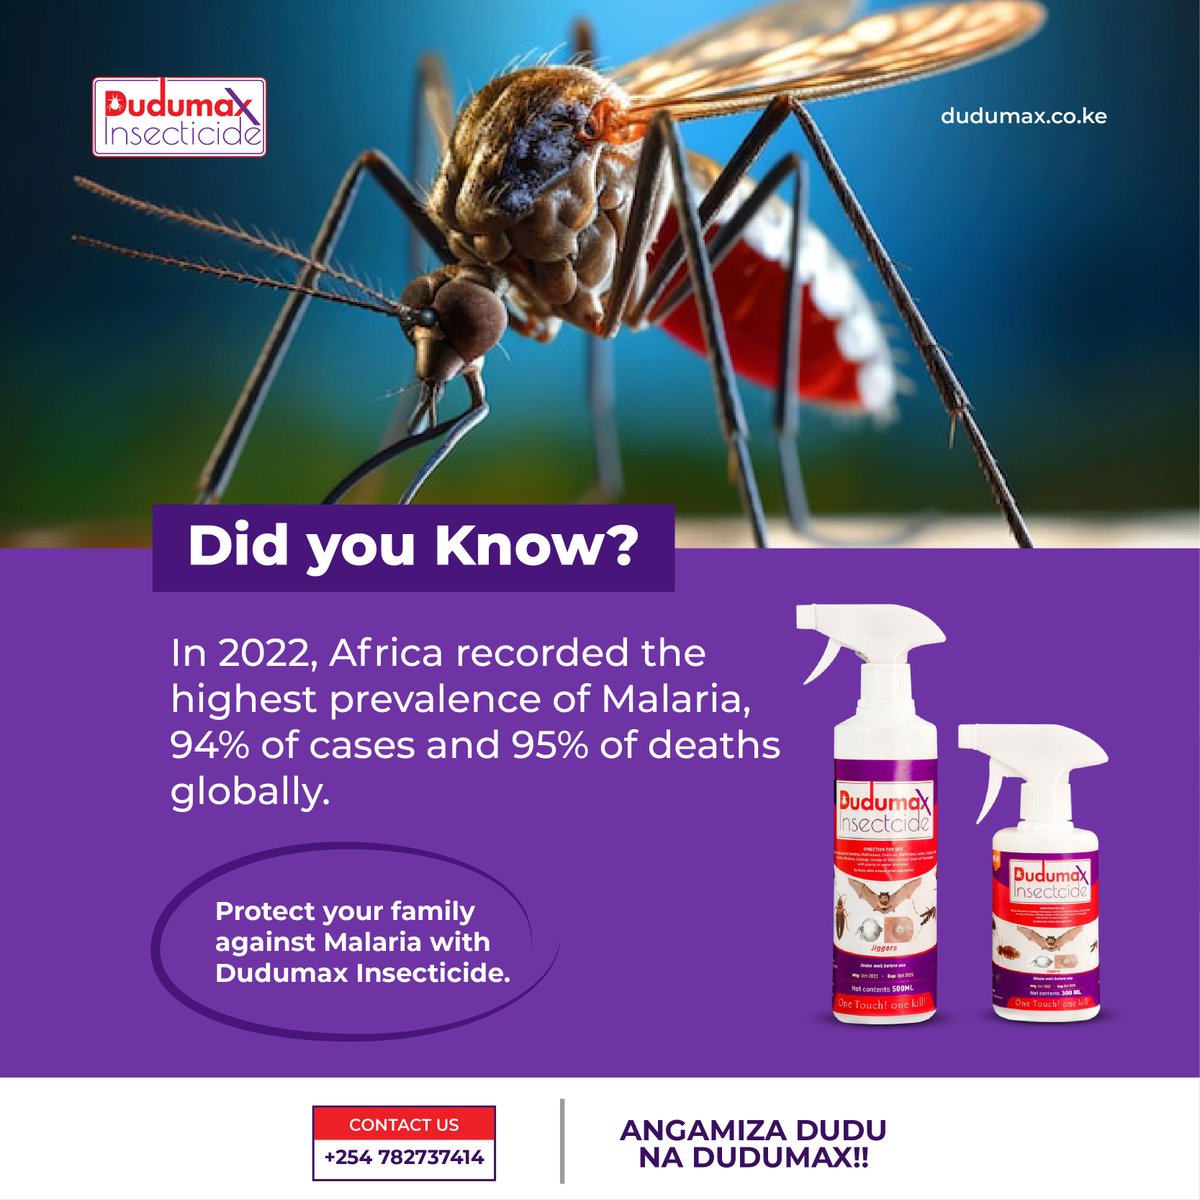 Did you know? Malaria remains a serious threat, especially in Africa. With Dudumax Insecticide, protect your loved ones against this deadly disease.

#fypシ
#Dudumax
#informationmonday 
#fumigationservices
#malariaprevention 
#pestcontrolservices